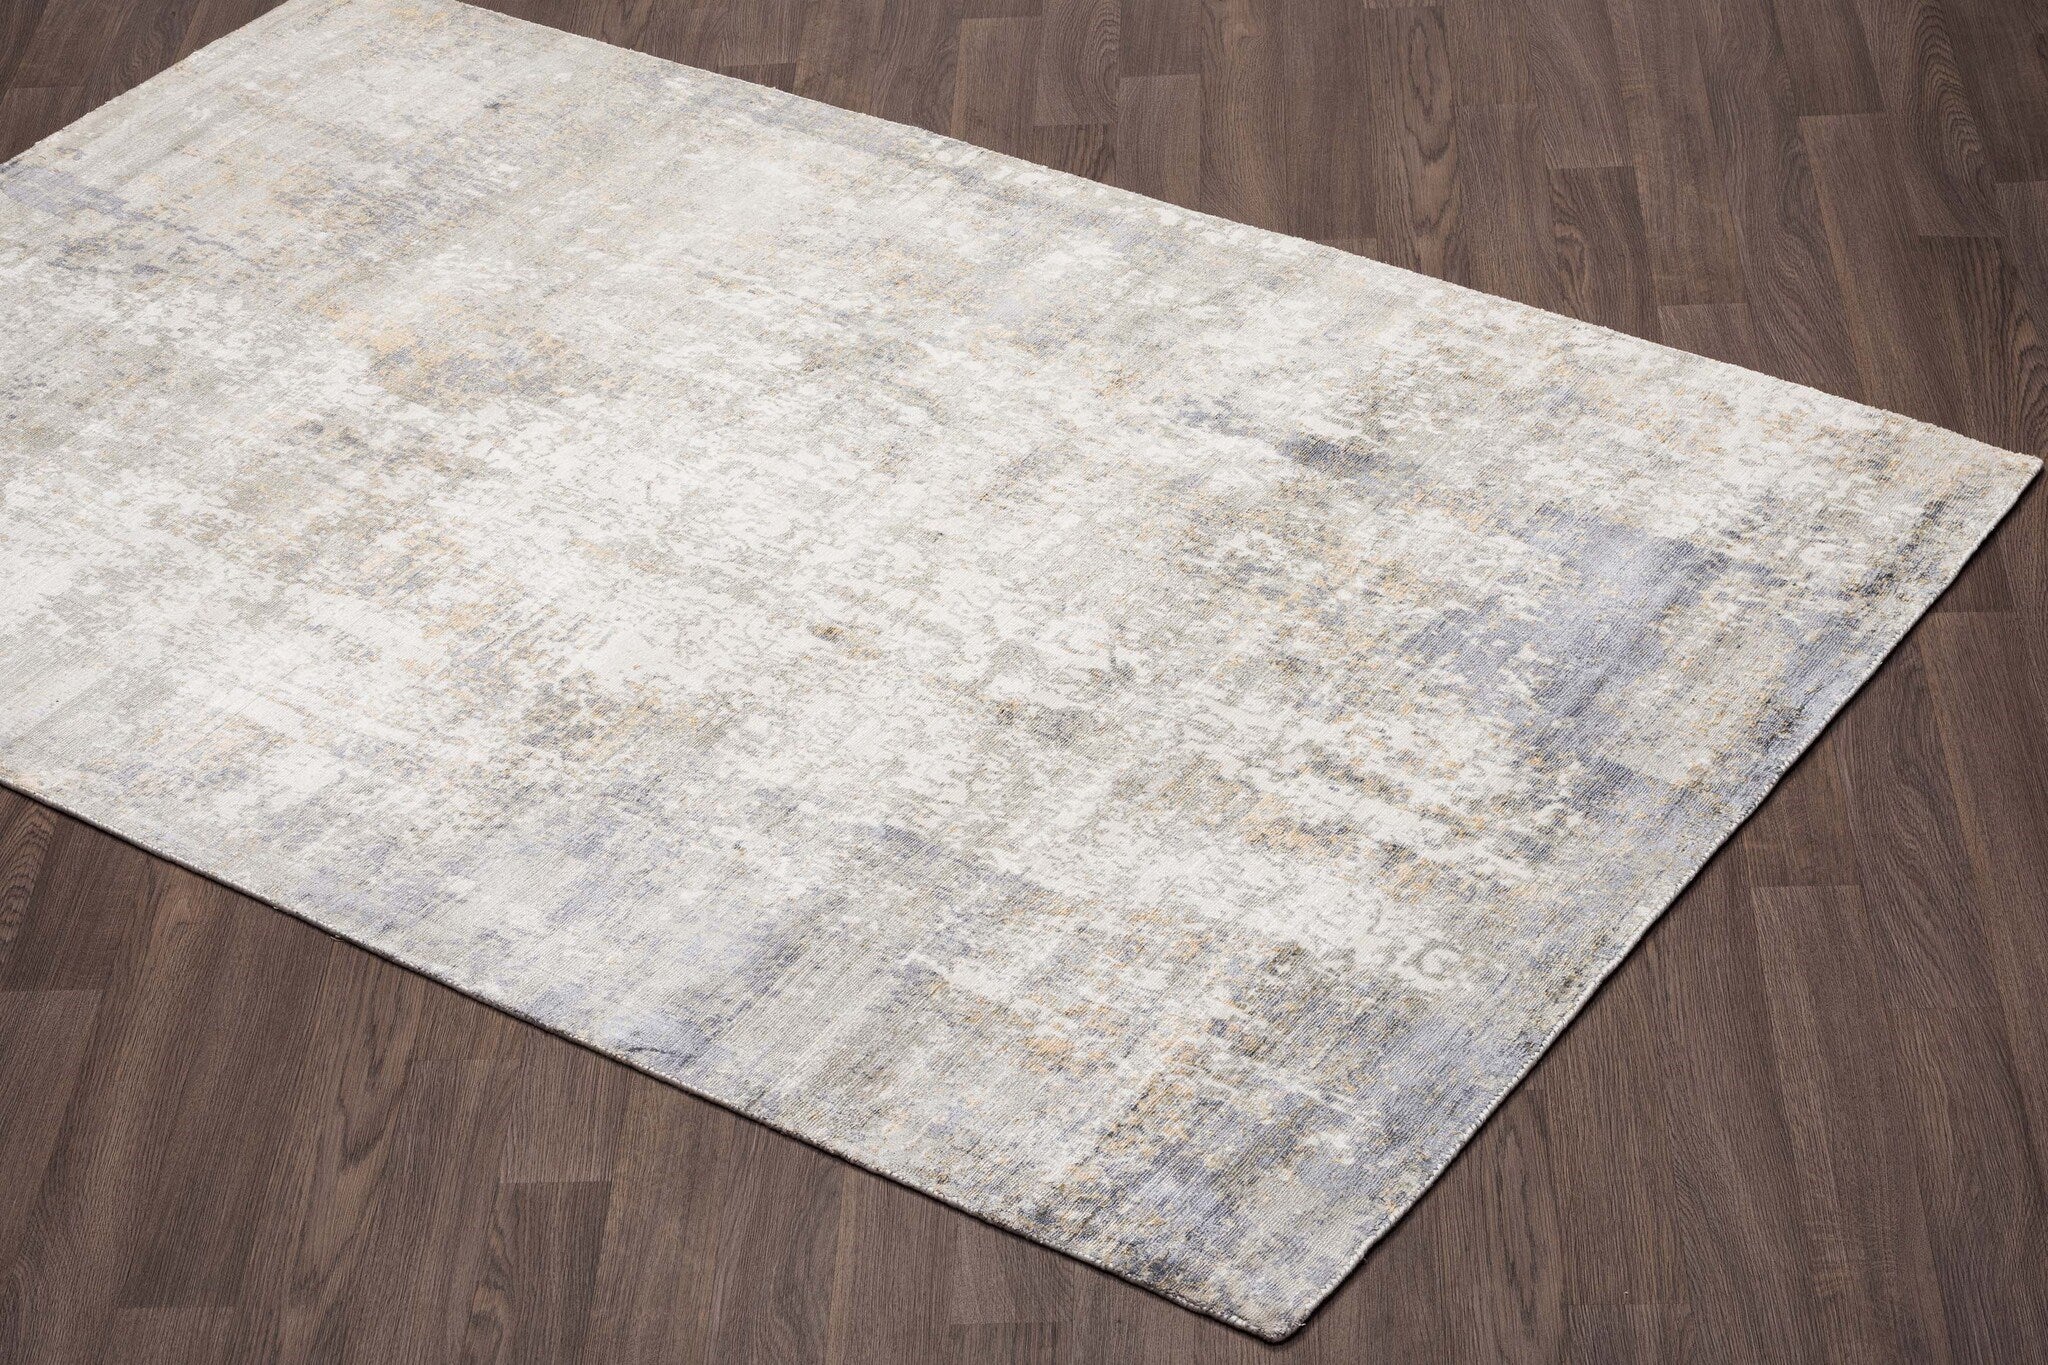 Troyes Area Rug